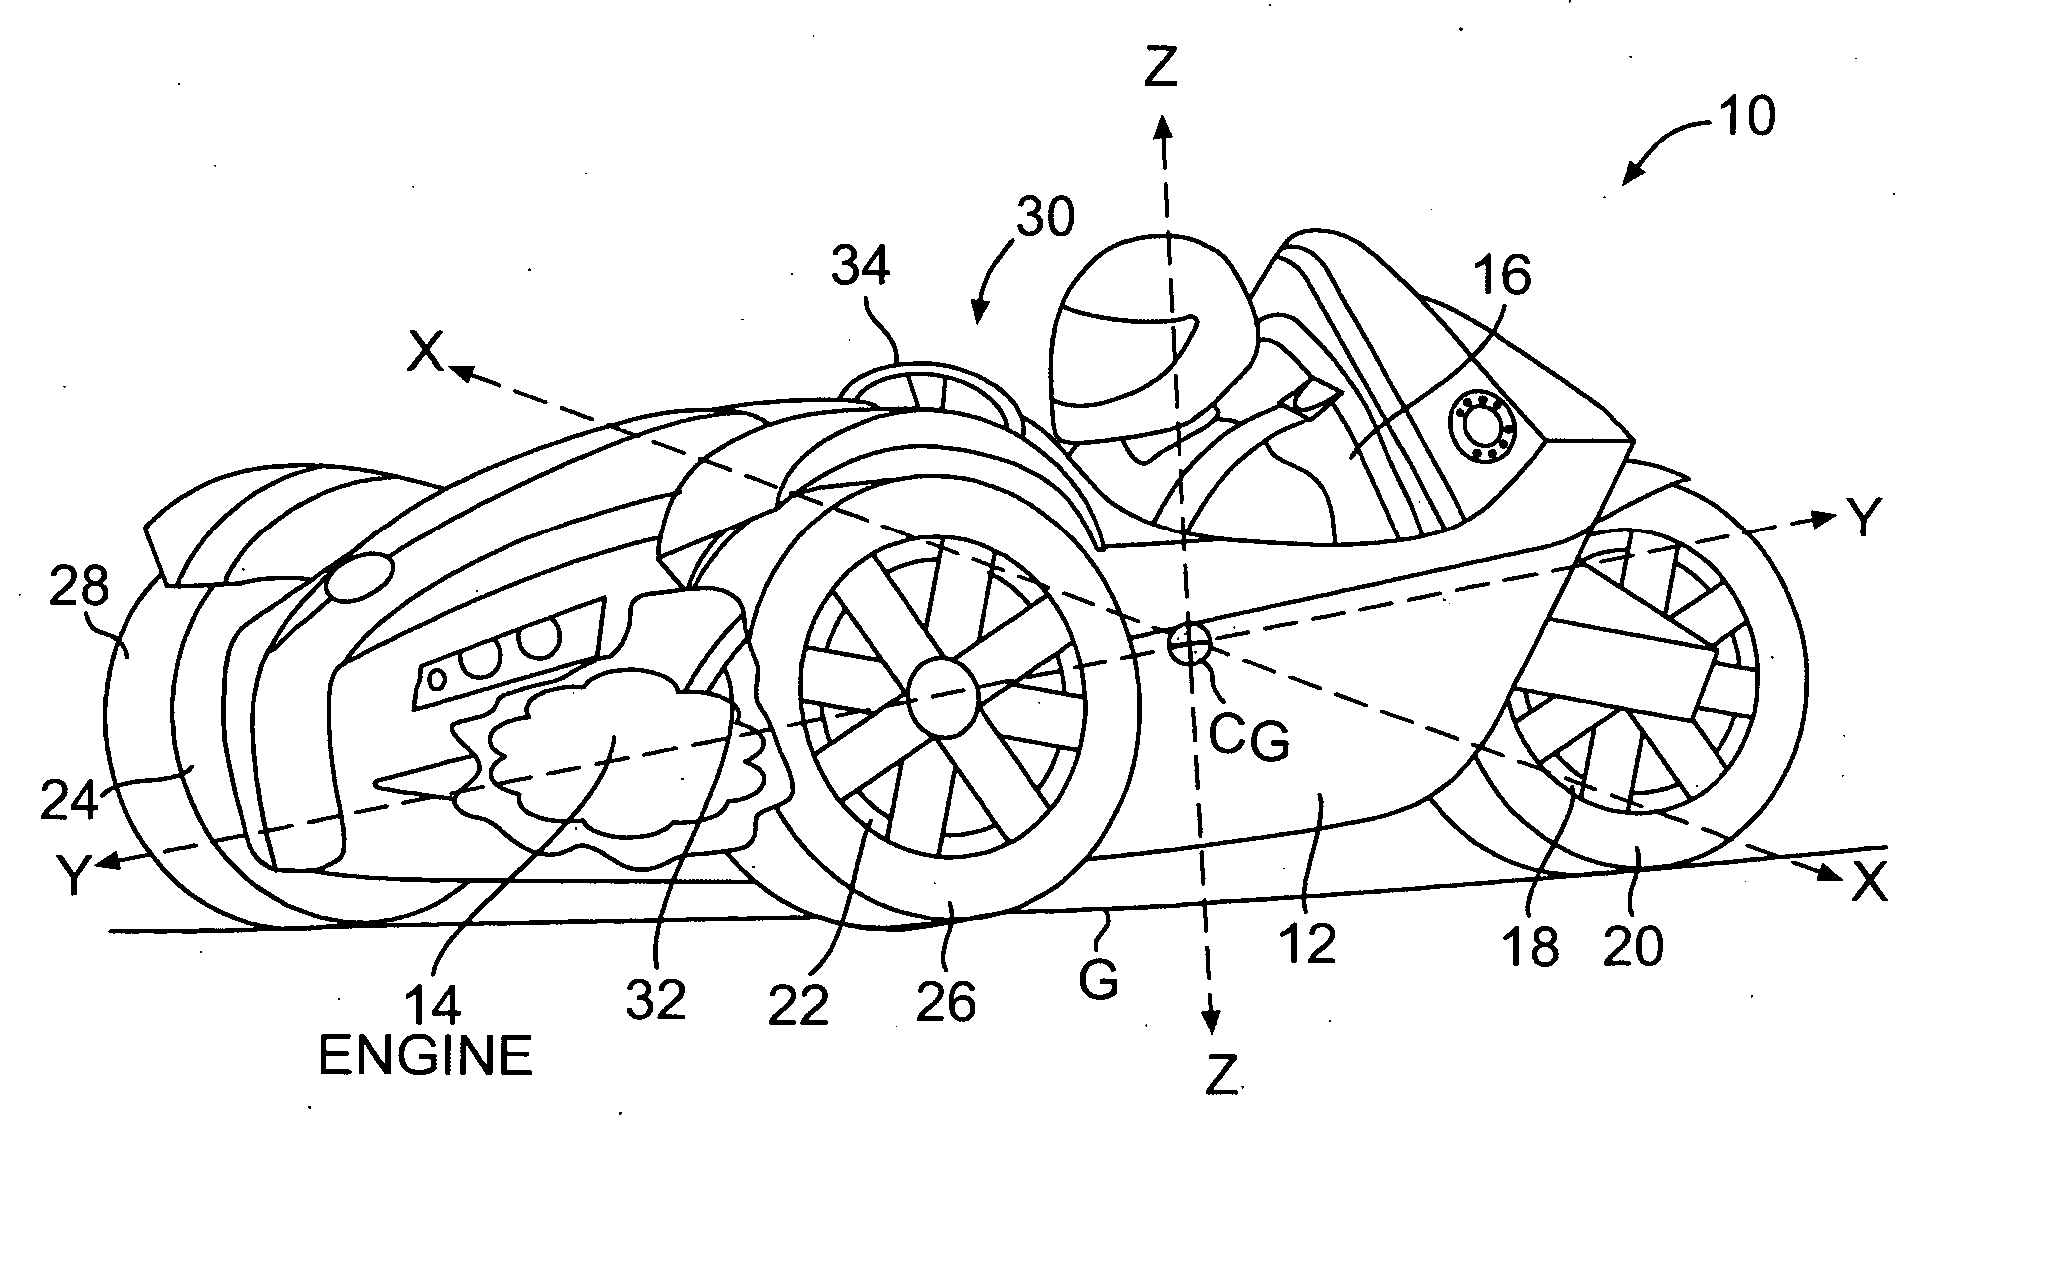 Electronic stability system on a three-wheeled vehicle